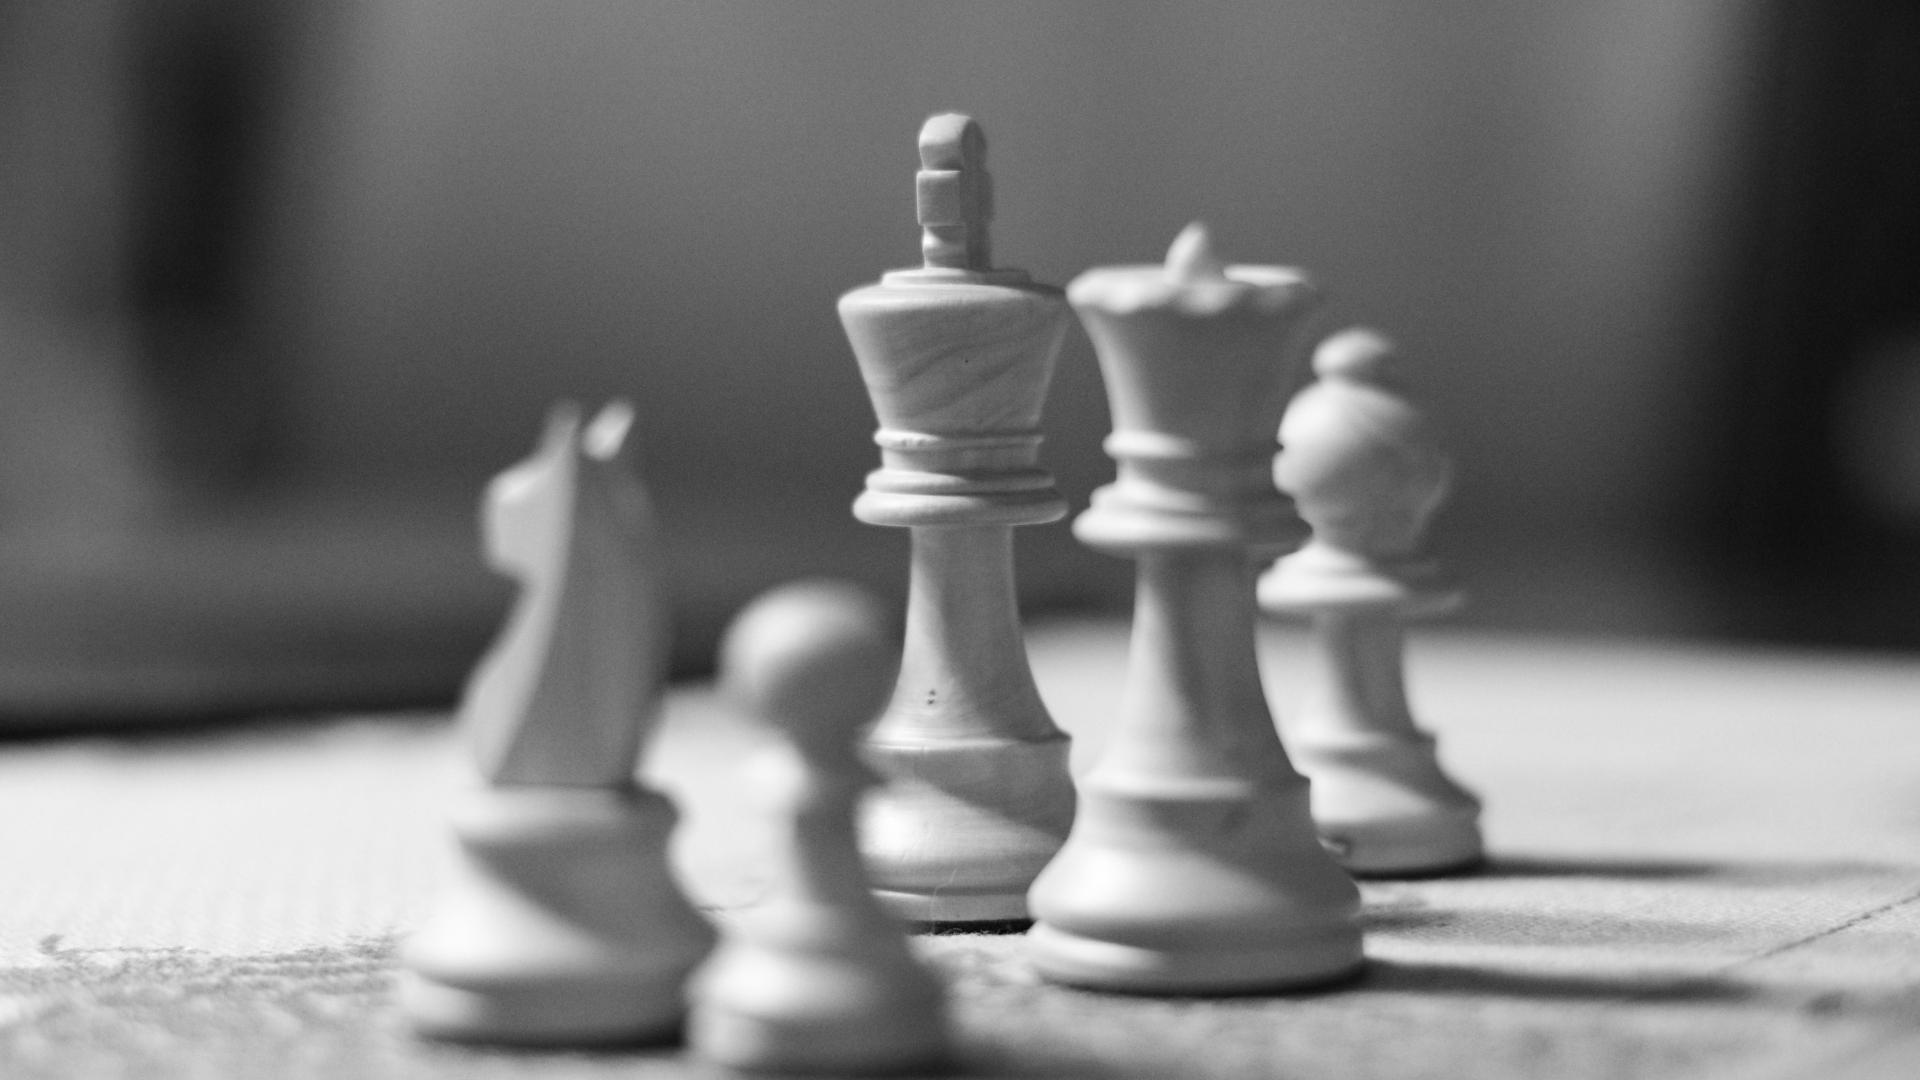 chess set to represent strategies to cut costs in a business